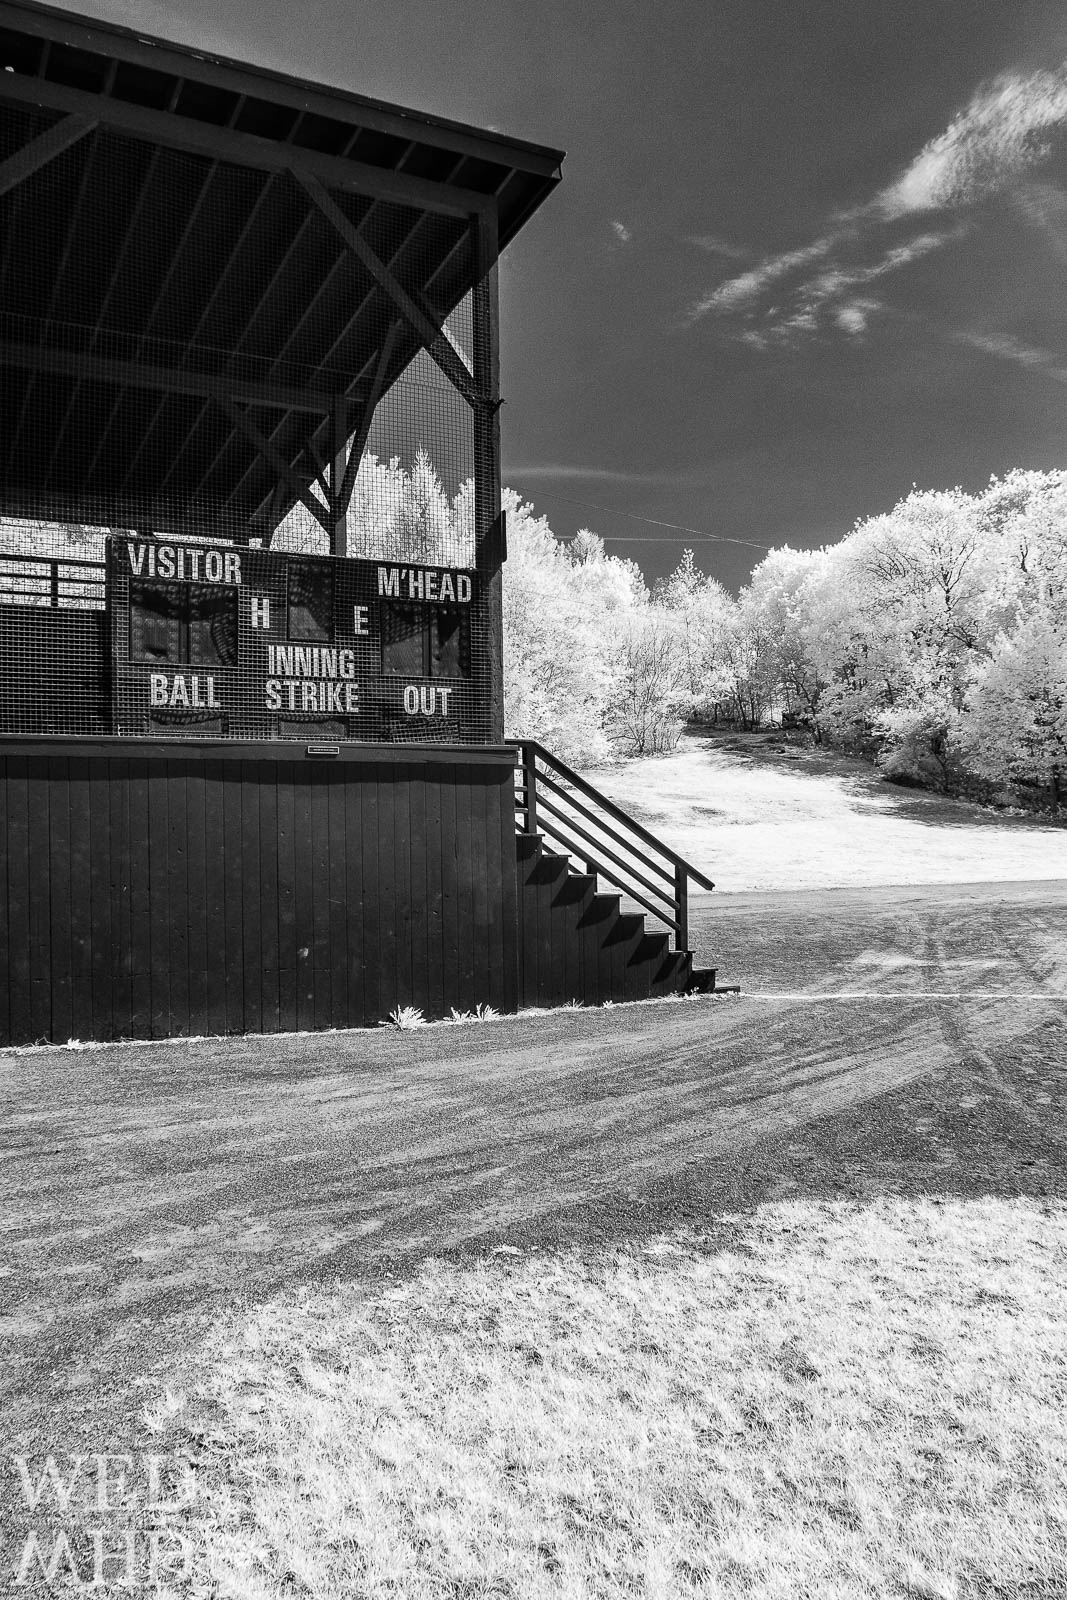 An empty scoreboard at Seaside park is captured in this infrared black and white image